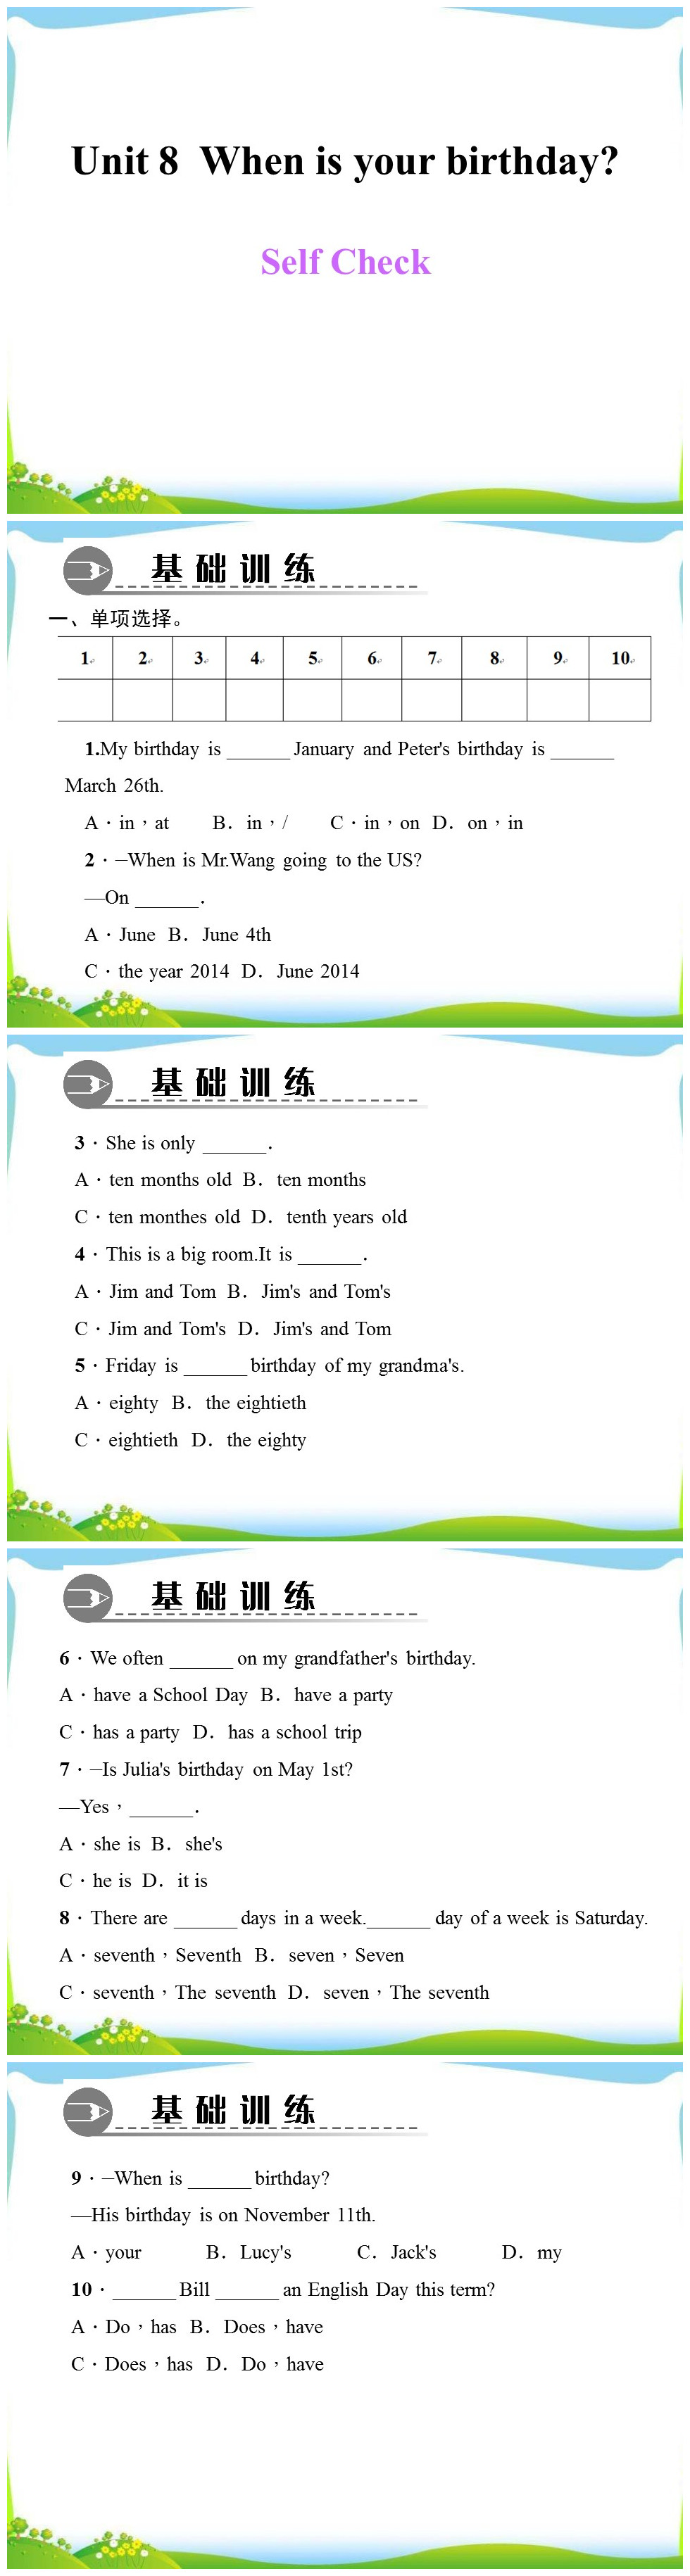 《When is your birthday?》PPT课件17